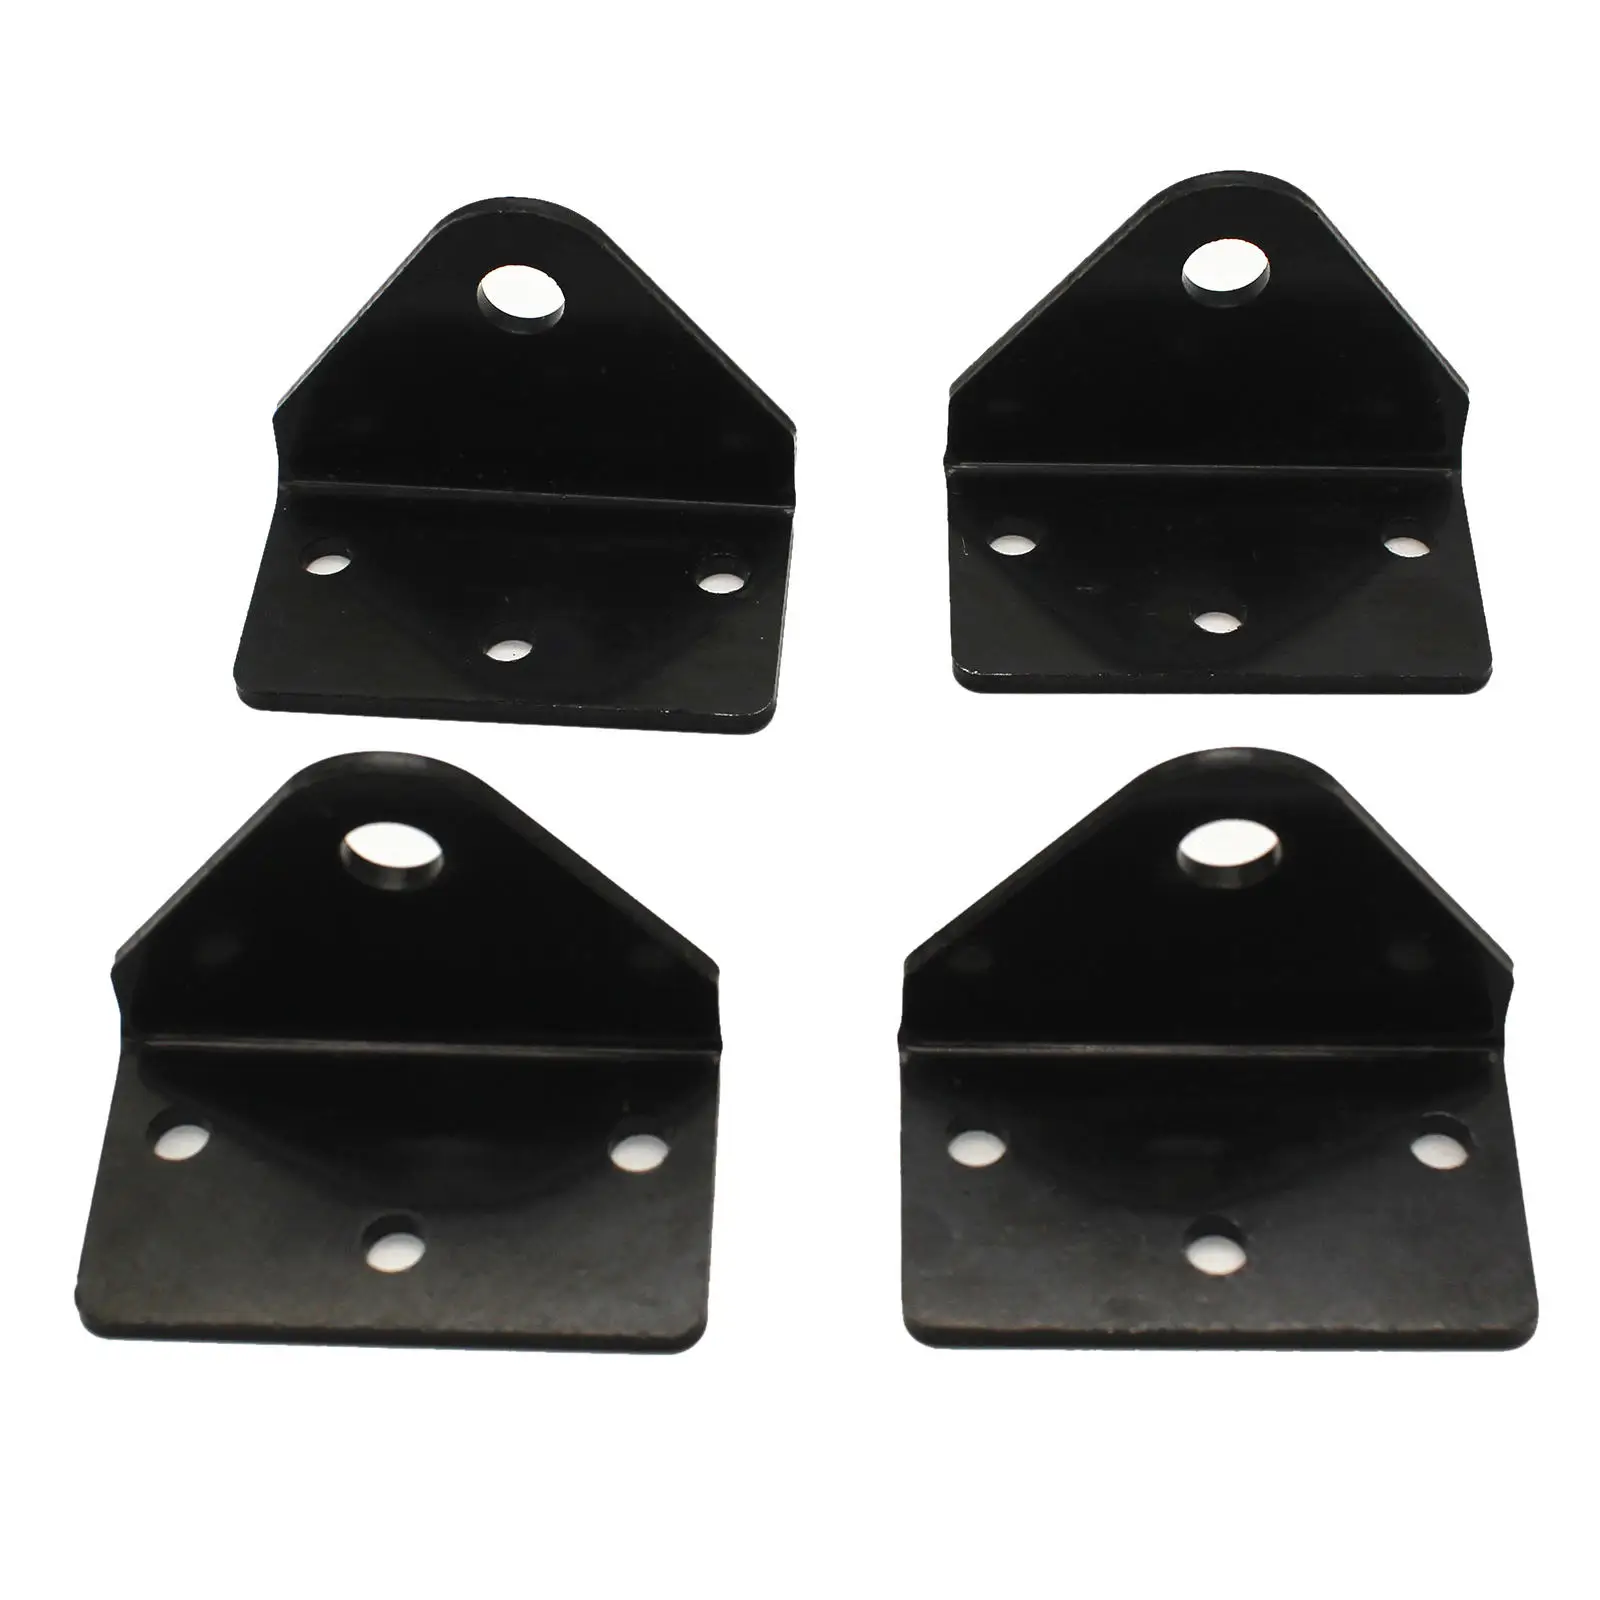 4Pcs Gas Struts Brackets Mounting L-Type for Lift Support Prop Replace Parts Tool Accessory